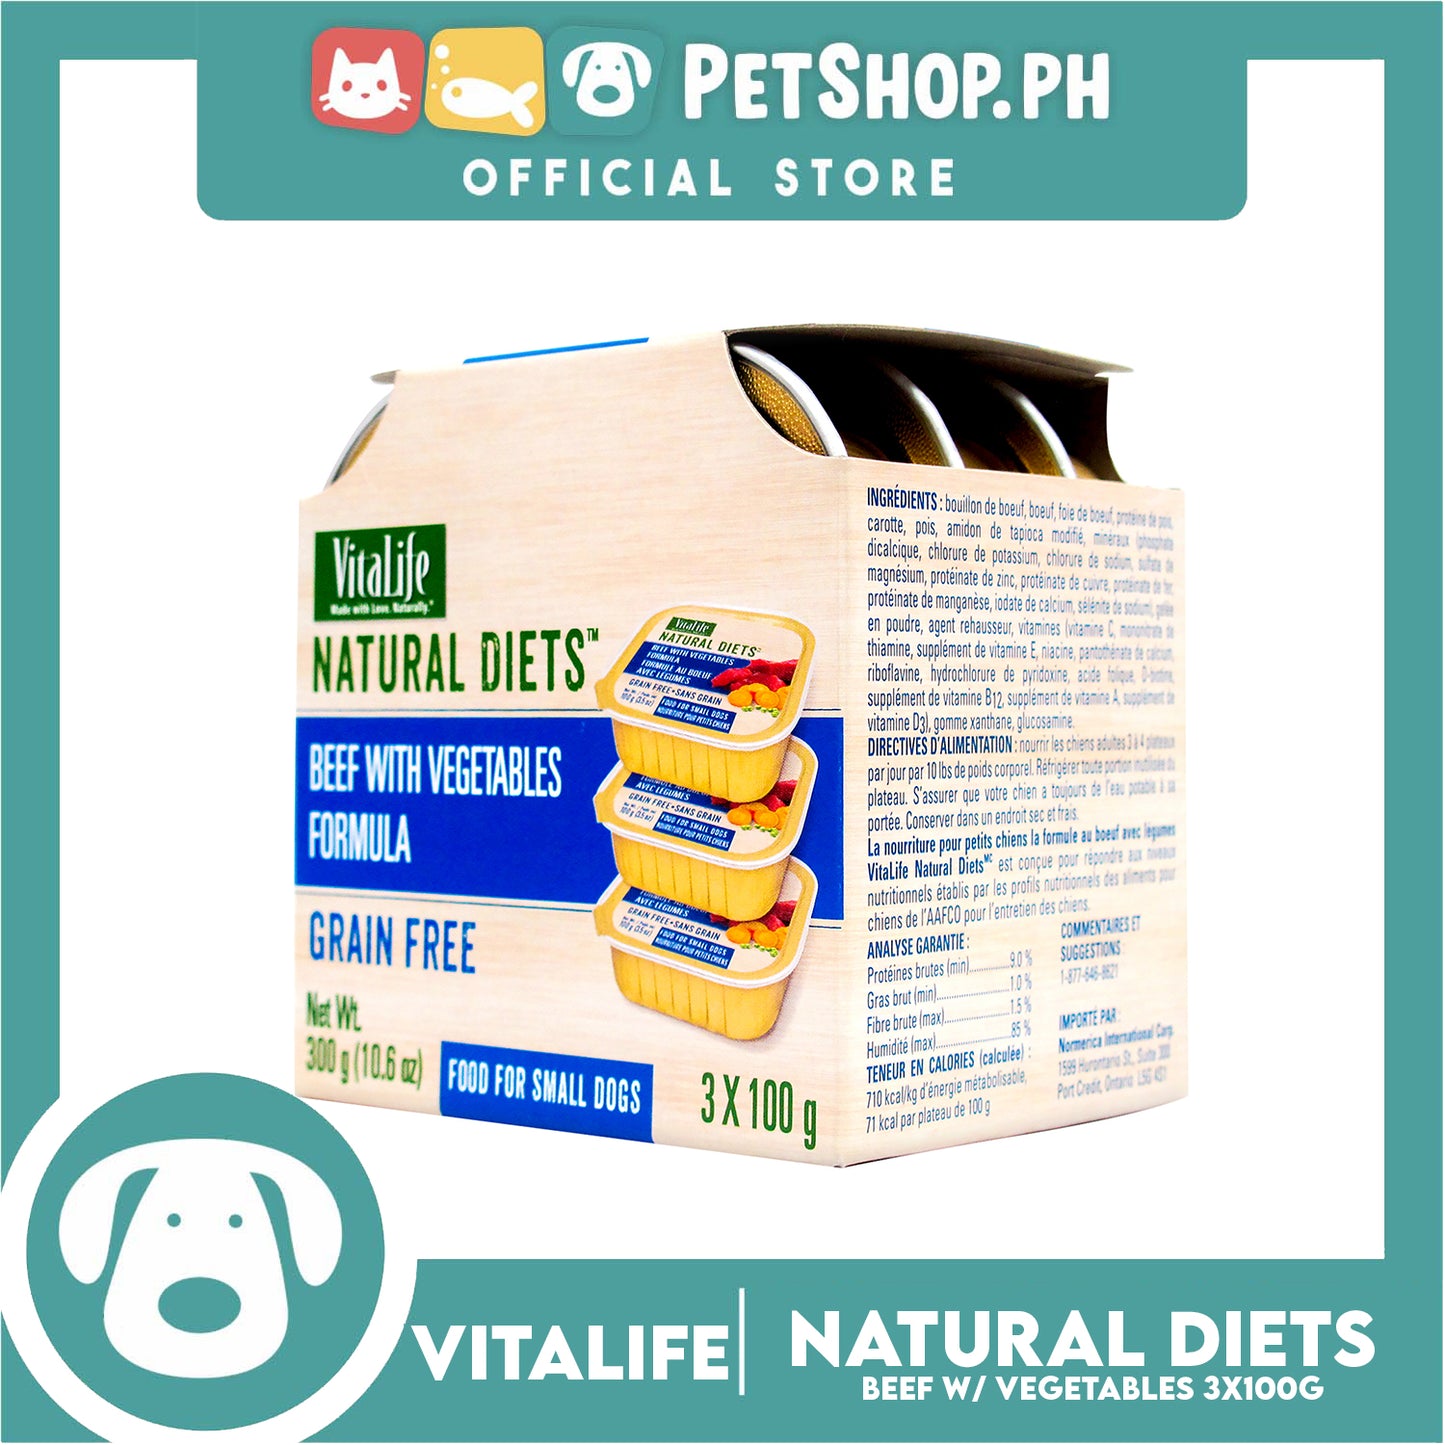 3pcs VitaLife Natural Diets, Grain Free 100g (Beef With Vegetables) Dog Food for Small Dogs, Dog Wet Food